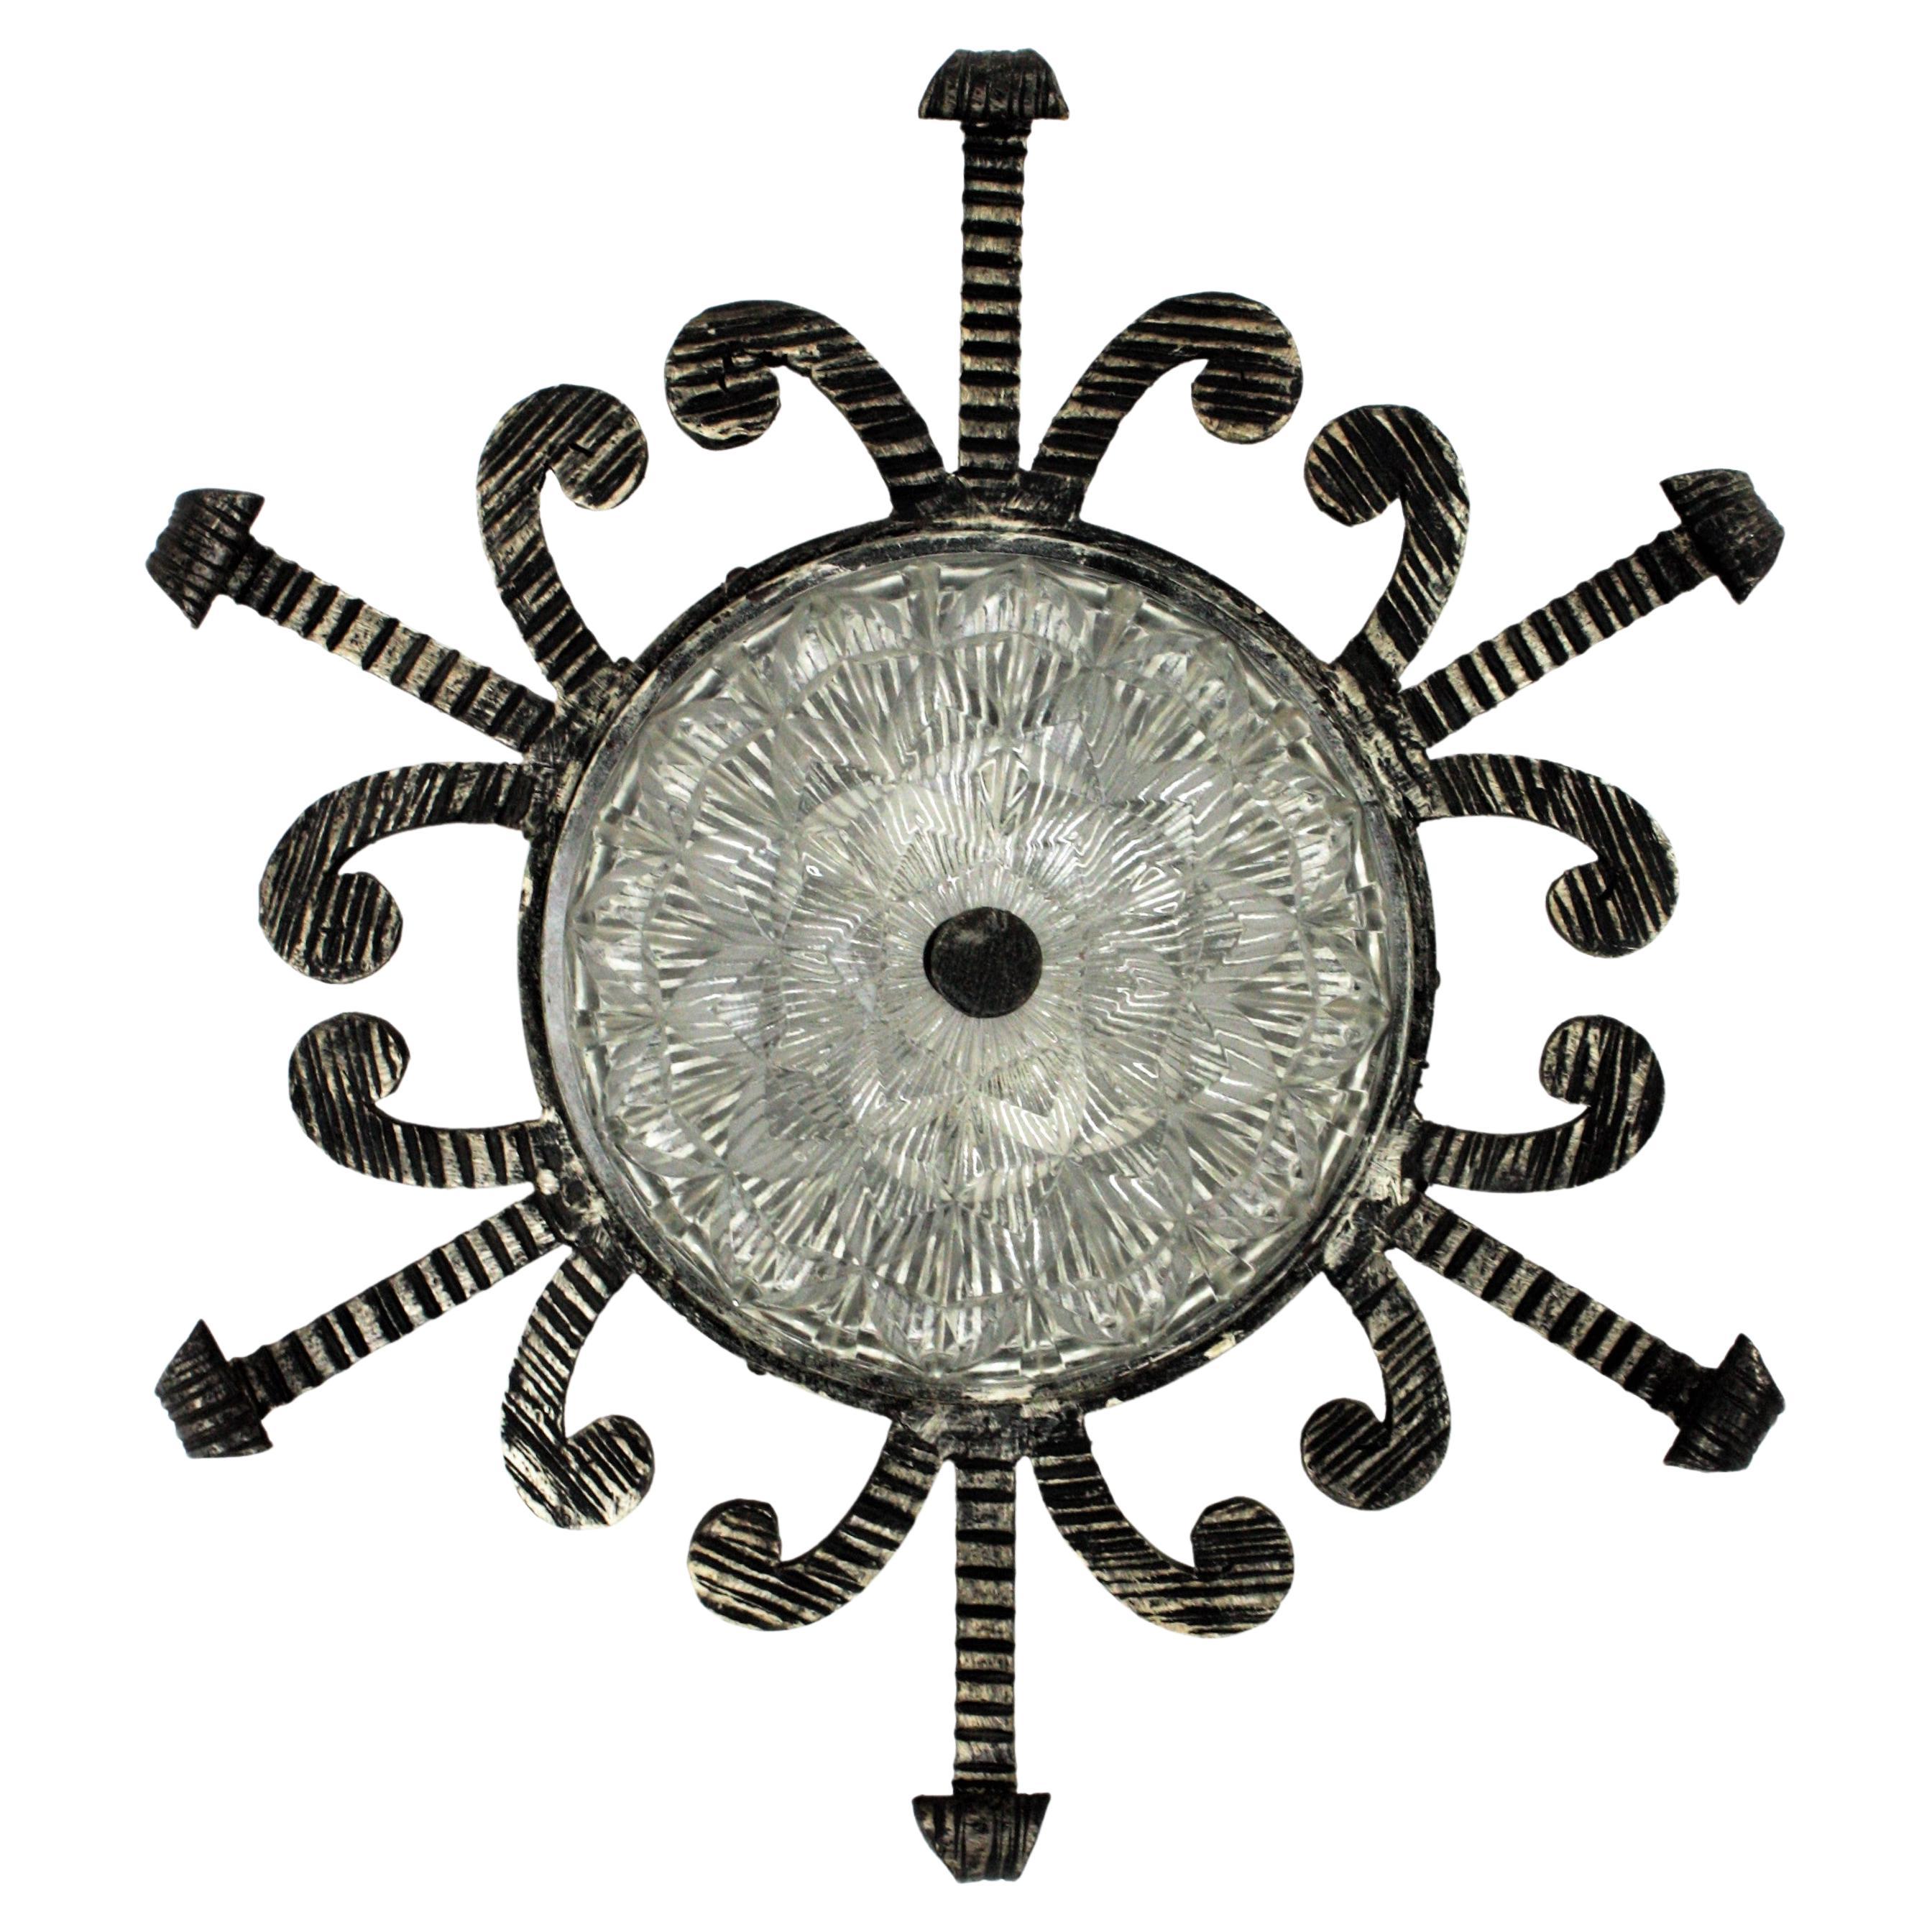 Handsome wrought iron sunburst flush mount / wall sconce with scrolled details and pressed glass shade, Spain, 1950s.
This hand forged light fixture has an interesting design and a very heavy construction. The frame has thick scrollwork accents,